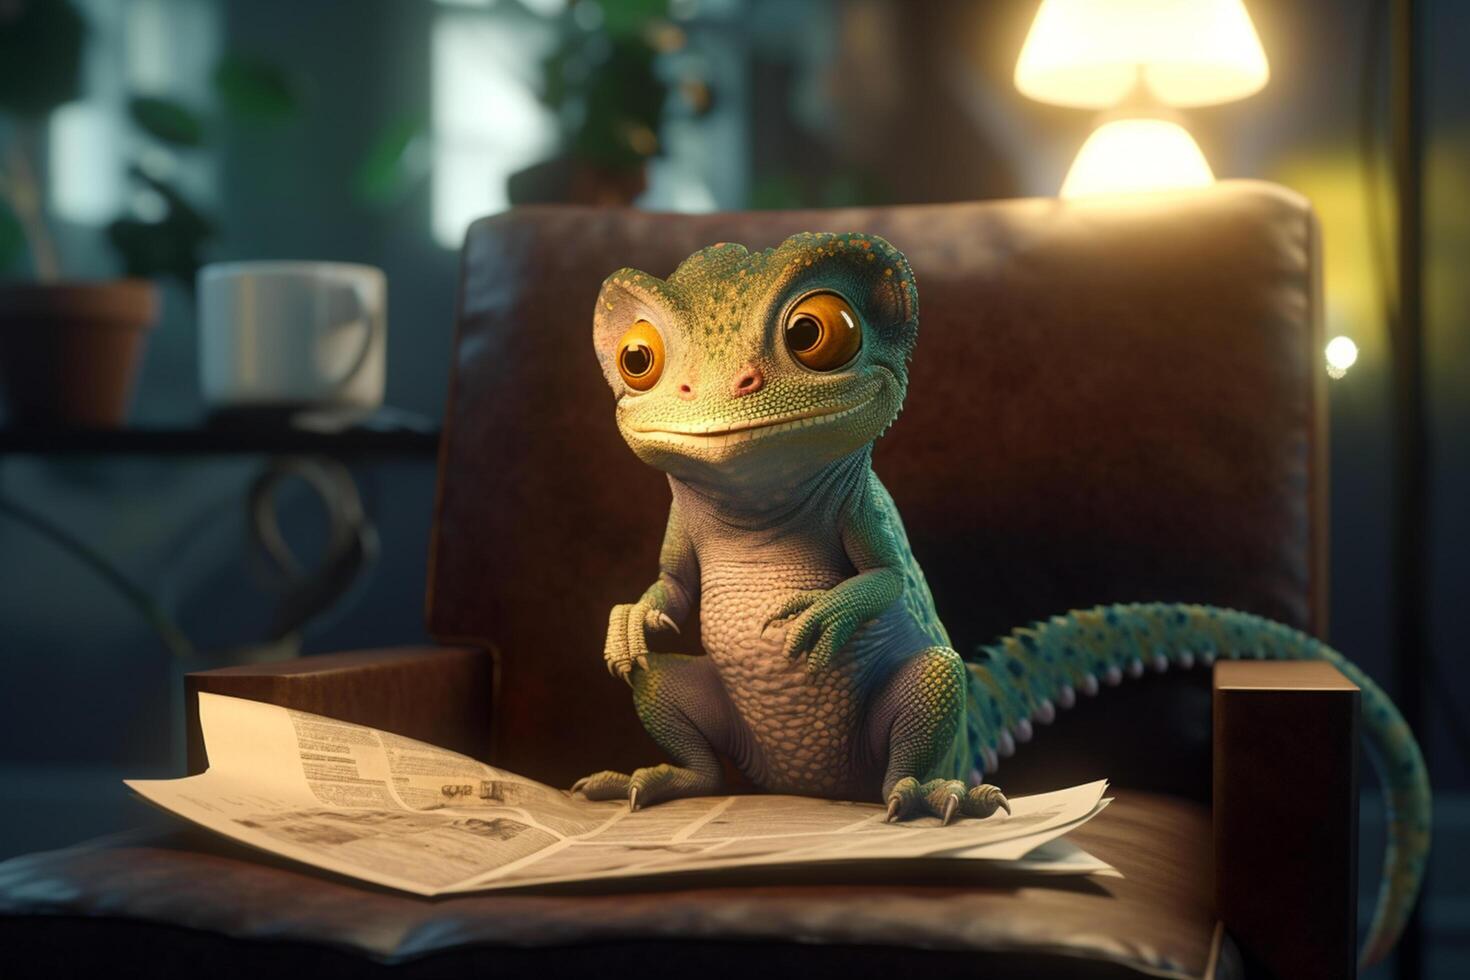 The Sophisticated Chameleon Reading the News in a Leather Armchair photo